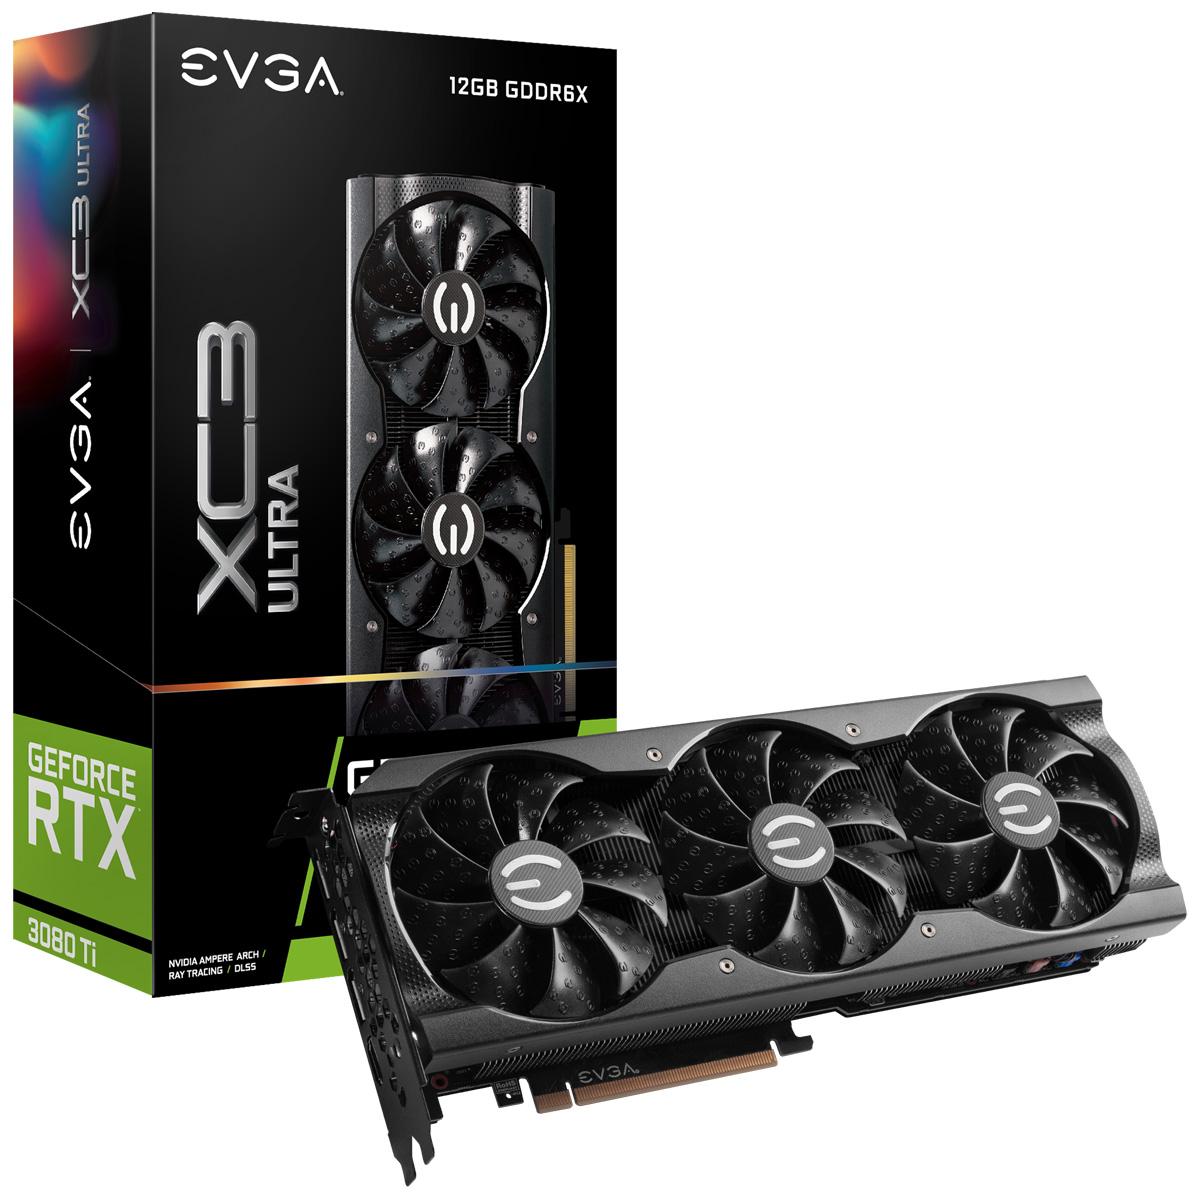 EVGA GeForce RTX 3080 Ti XC3 Gaming Graphics Card for $1329.99 Shipped